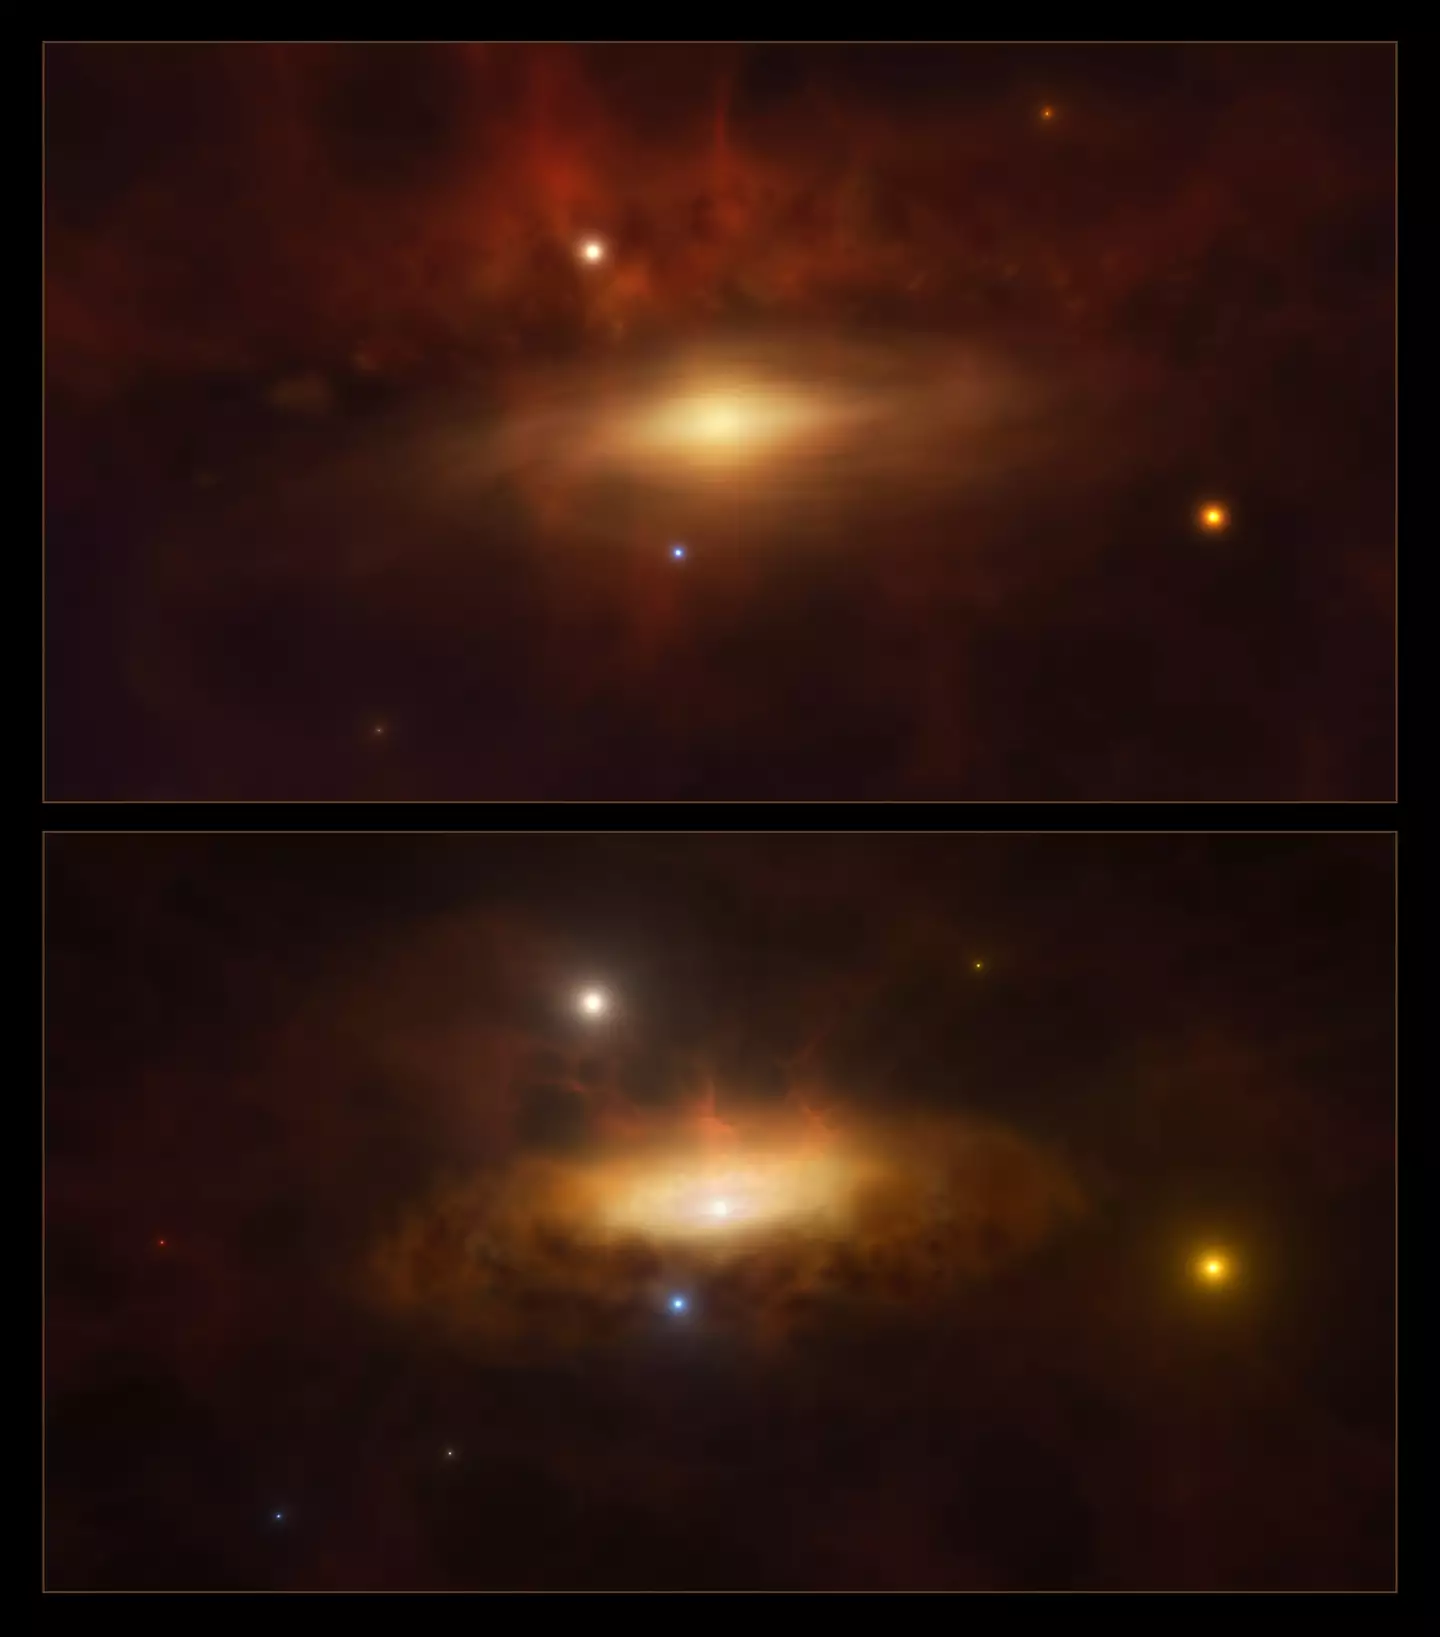 The top image is less bright than the bottom, which is the newer image showing the black hole's recent activity (ESO/M. Kornmesser)